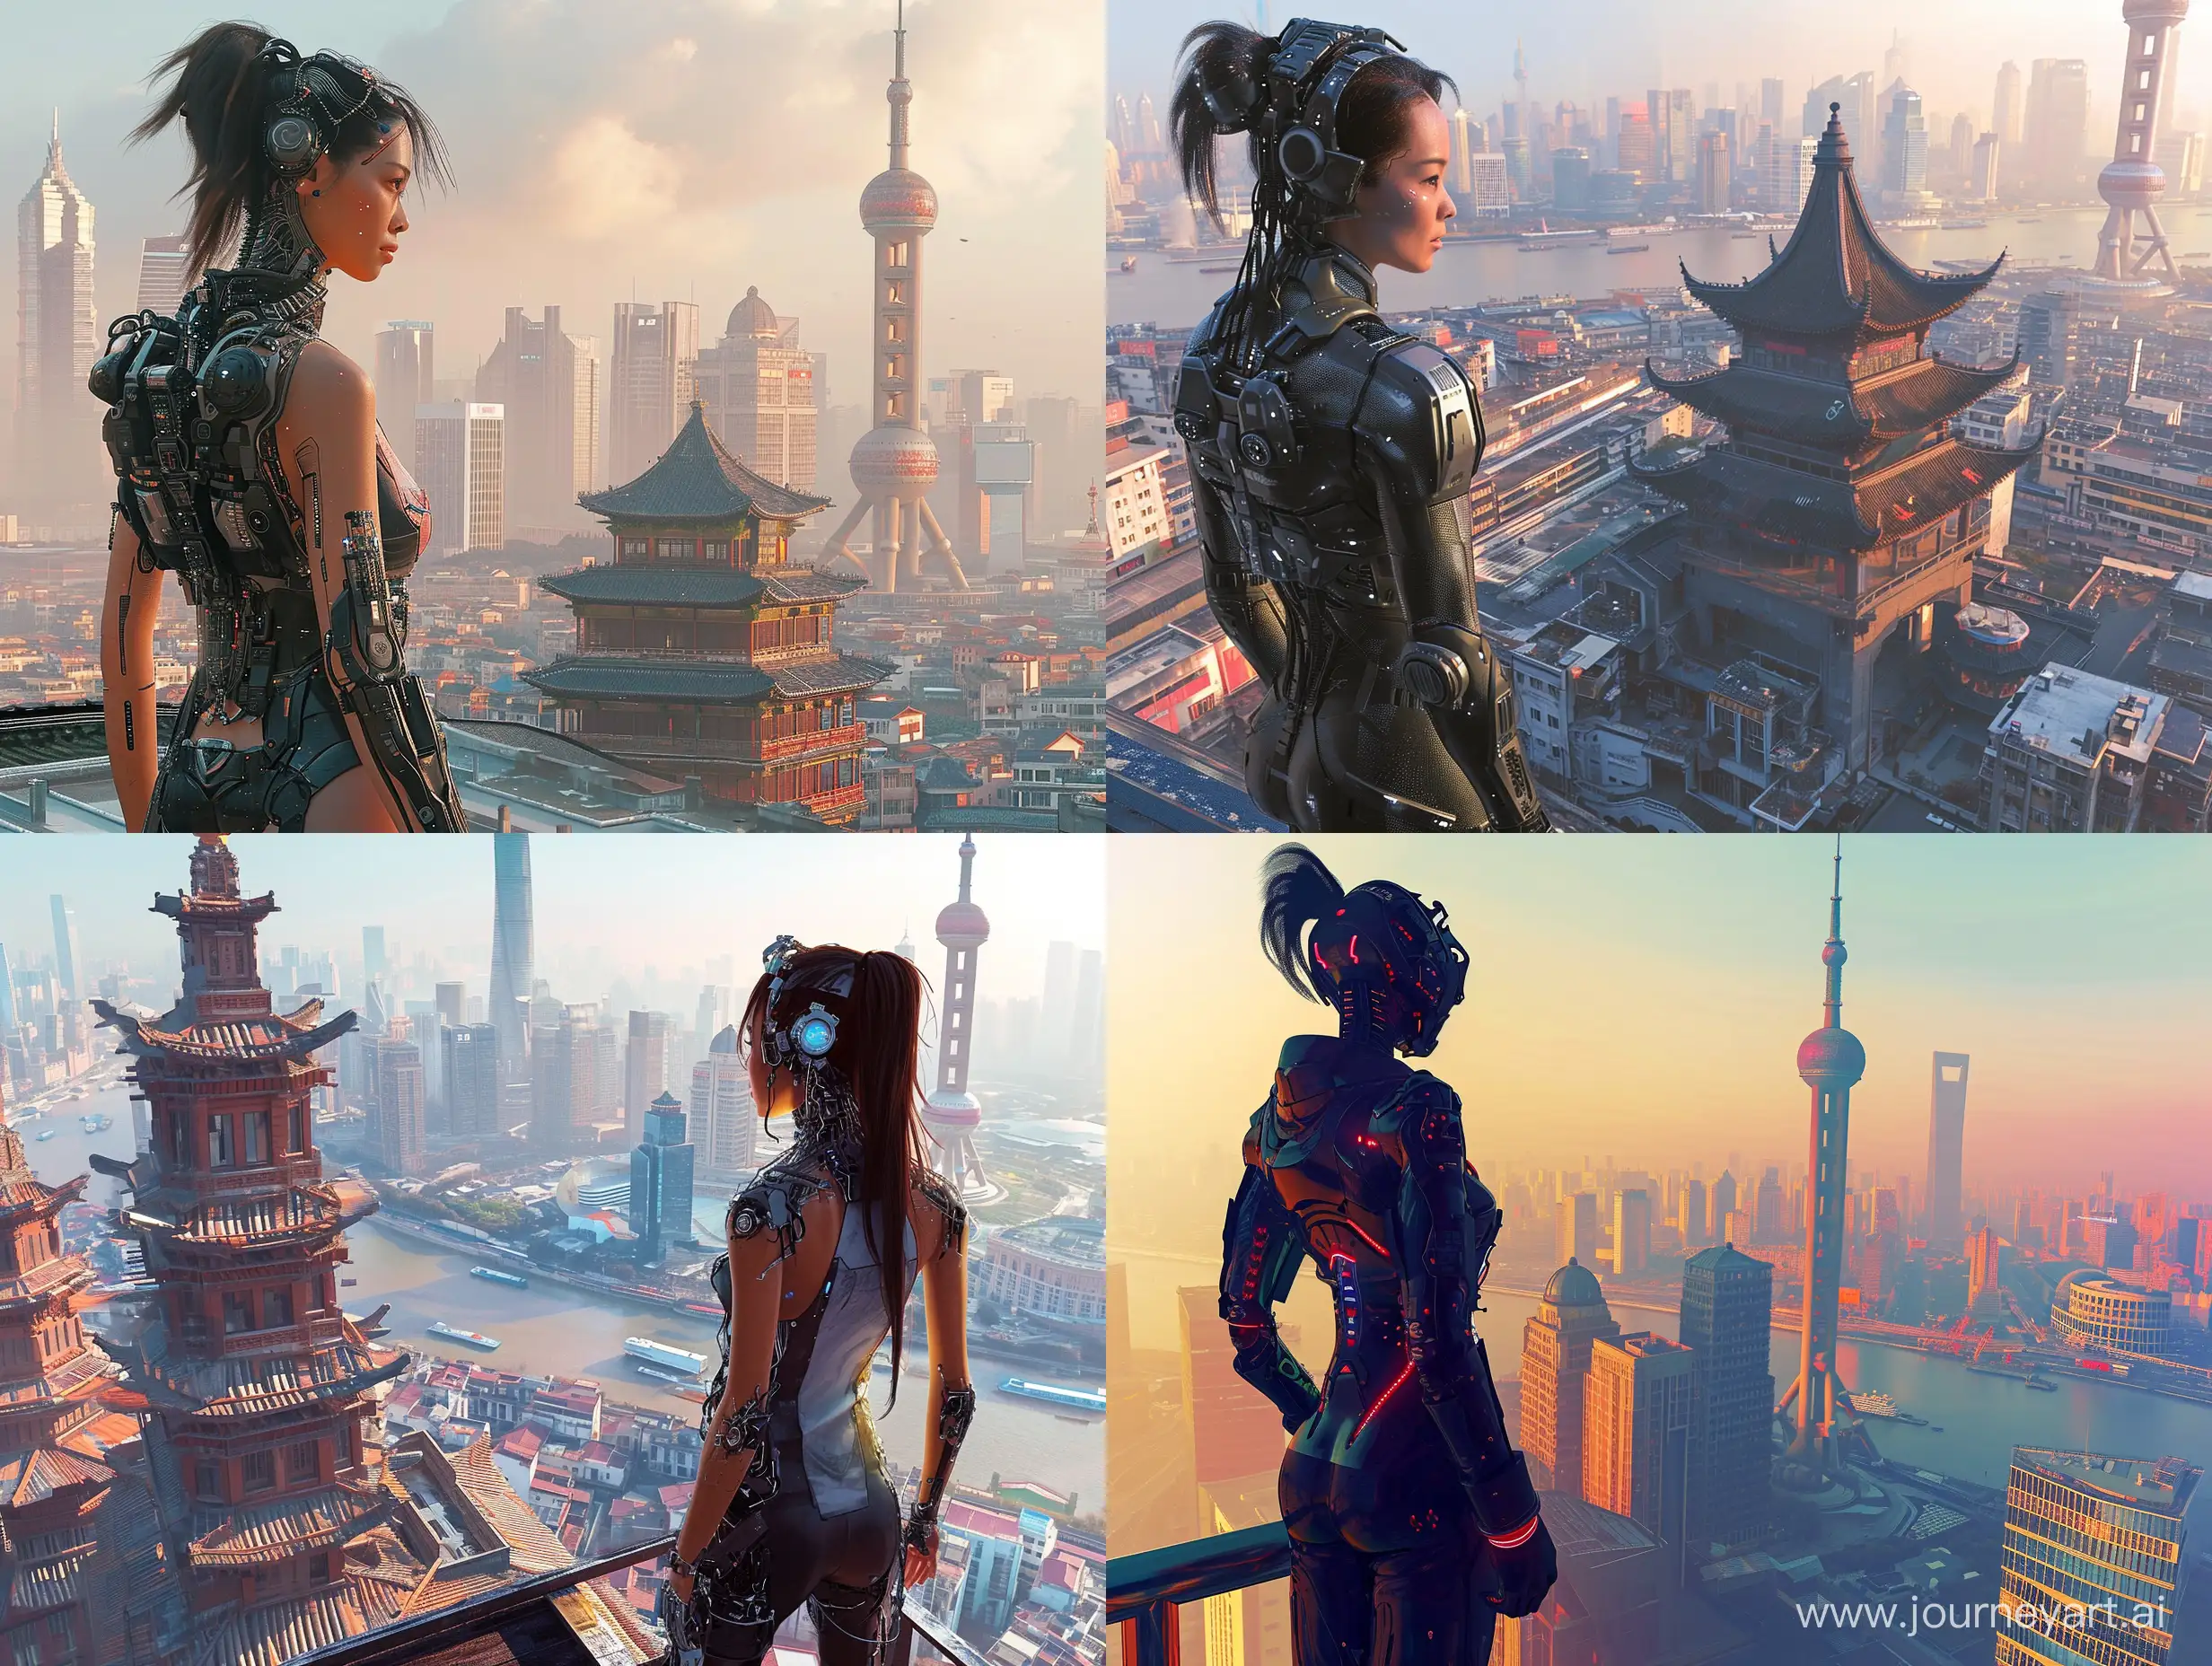 a cybernetic women standing on a rooftop building, looking at the viewer a bustling Futuristic city, the detail on the image is insanely perfect, sci fi, modern, busy environment, naturalism, vibrant, transportation, cinematic, soft visuals to match the mood, modern architectures, dystopian, ancient skyscrapers and buildings, residences, shanghai city
